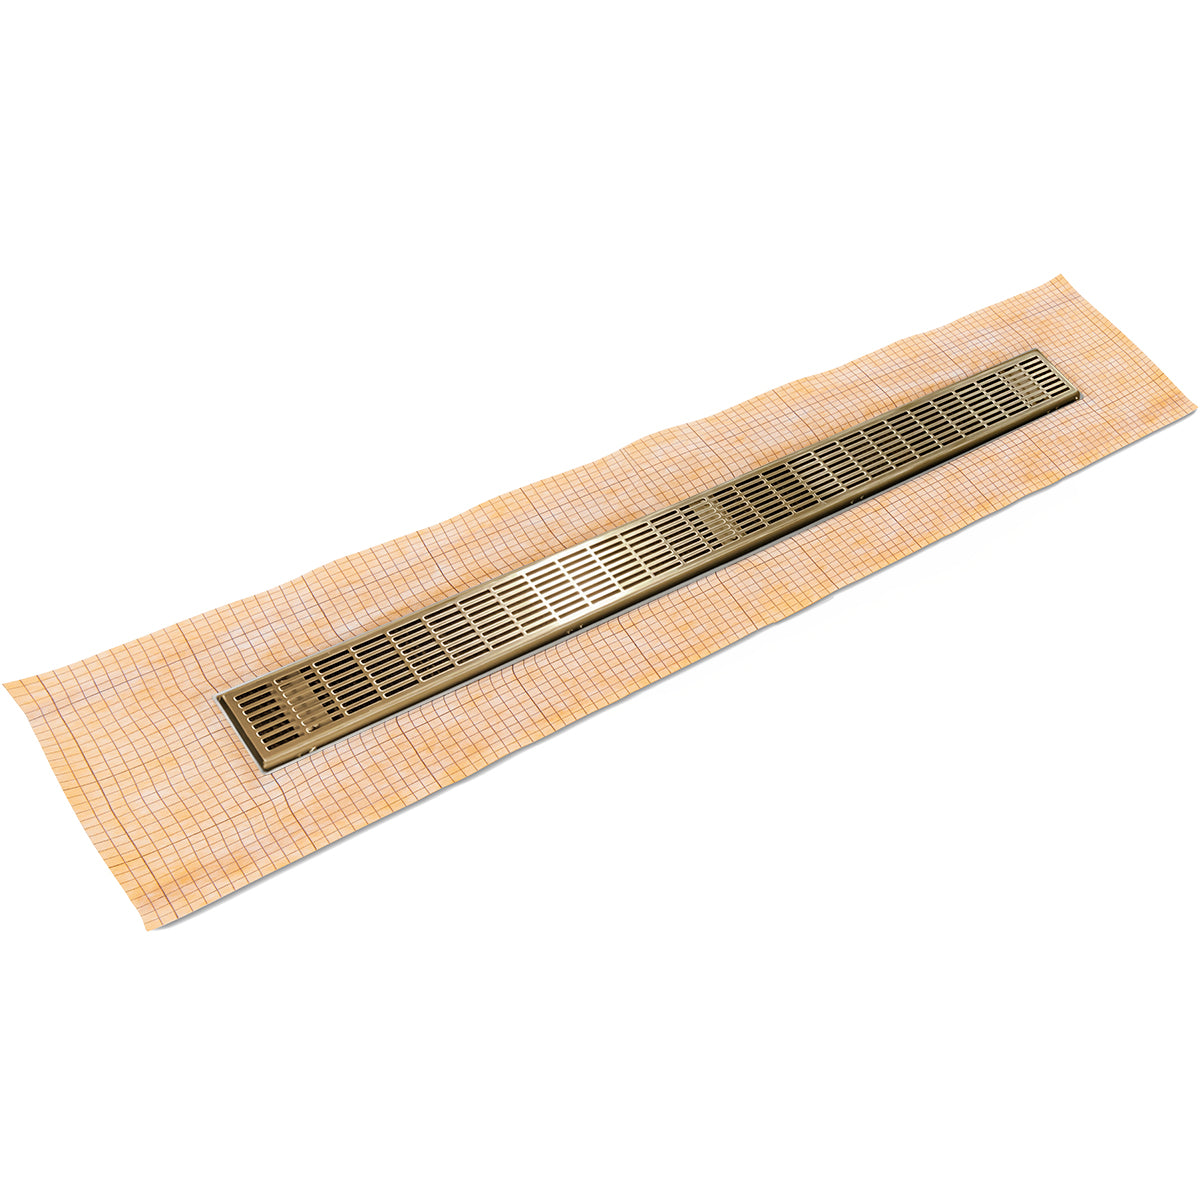 Infinity Drain 36" FCS Series Schluter-Kerdi - Fixed Flange Linear Drain Kit with 2 1/2" Perforated Slotted Grate